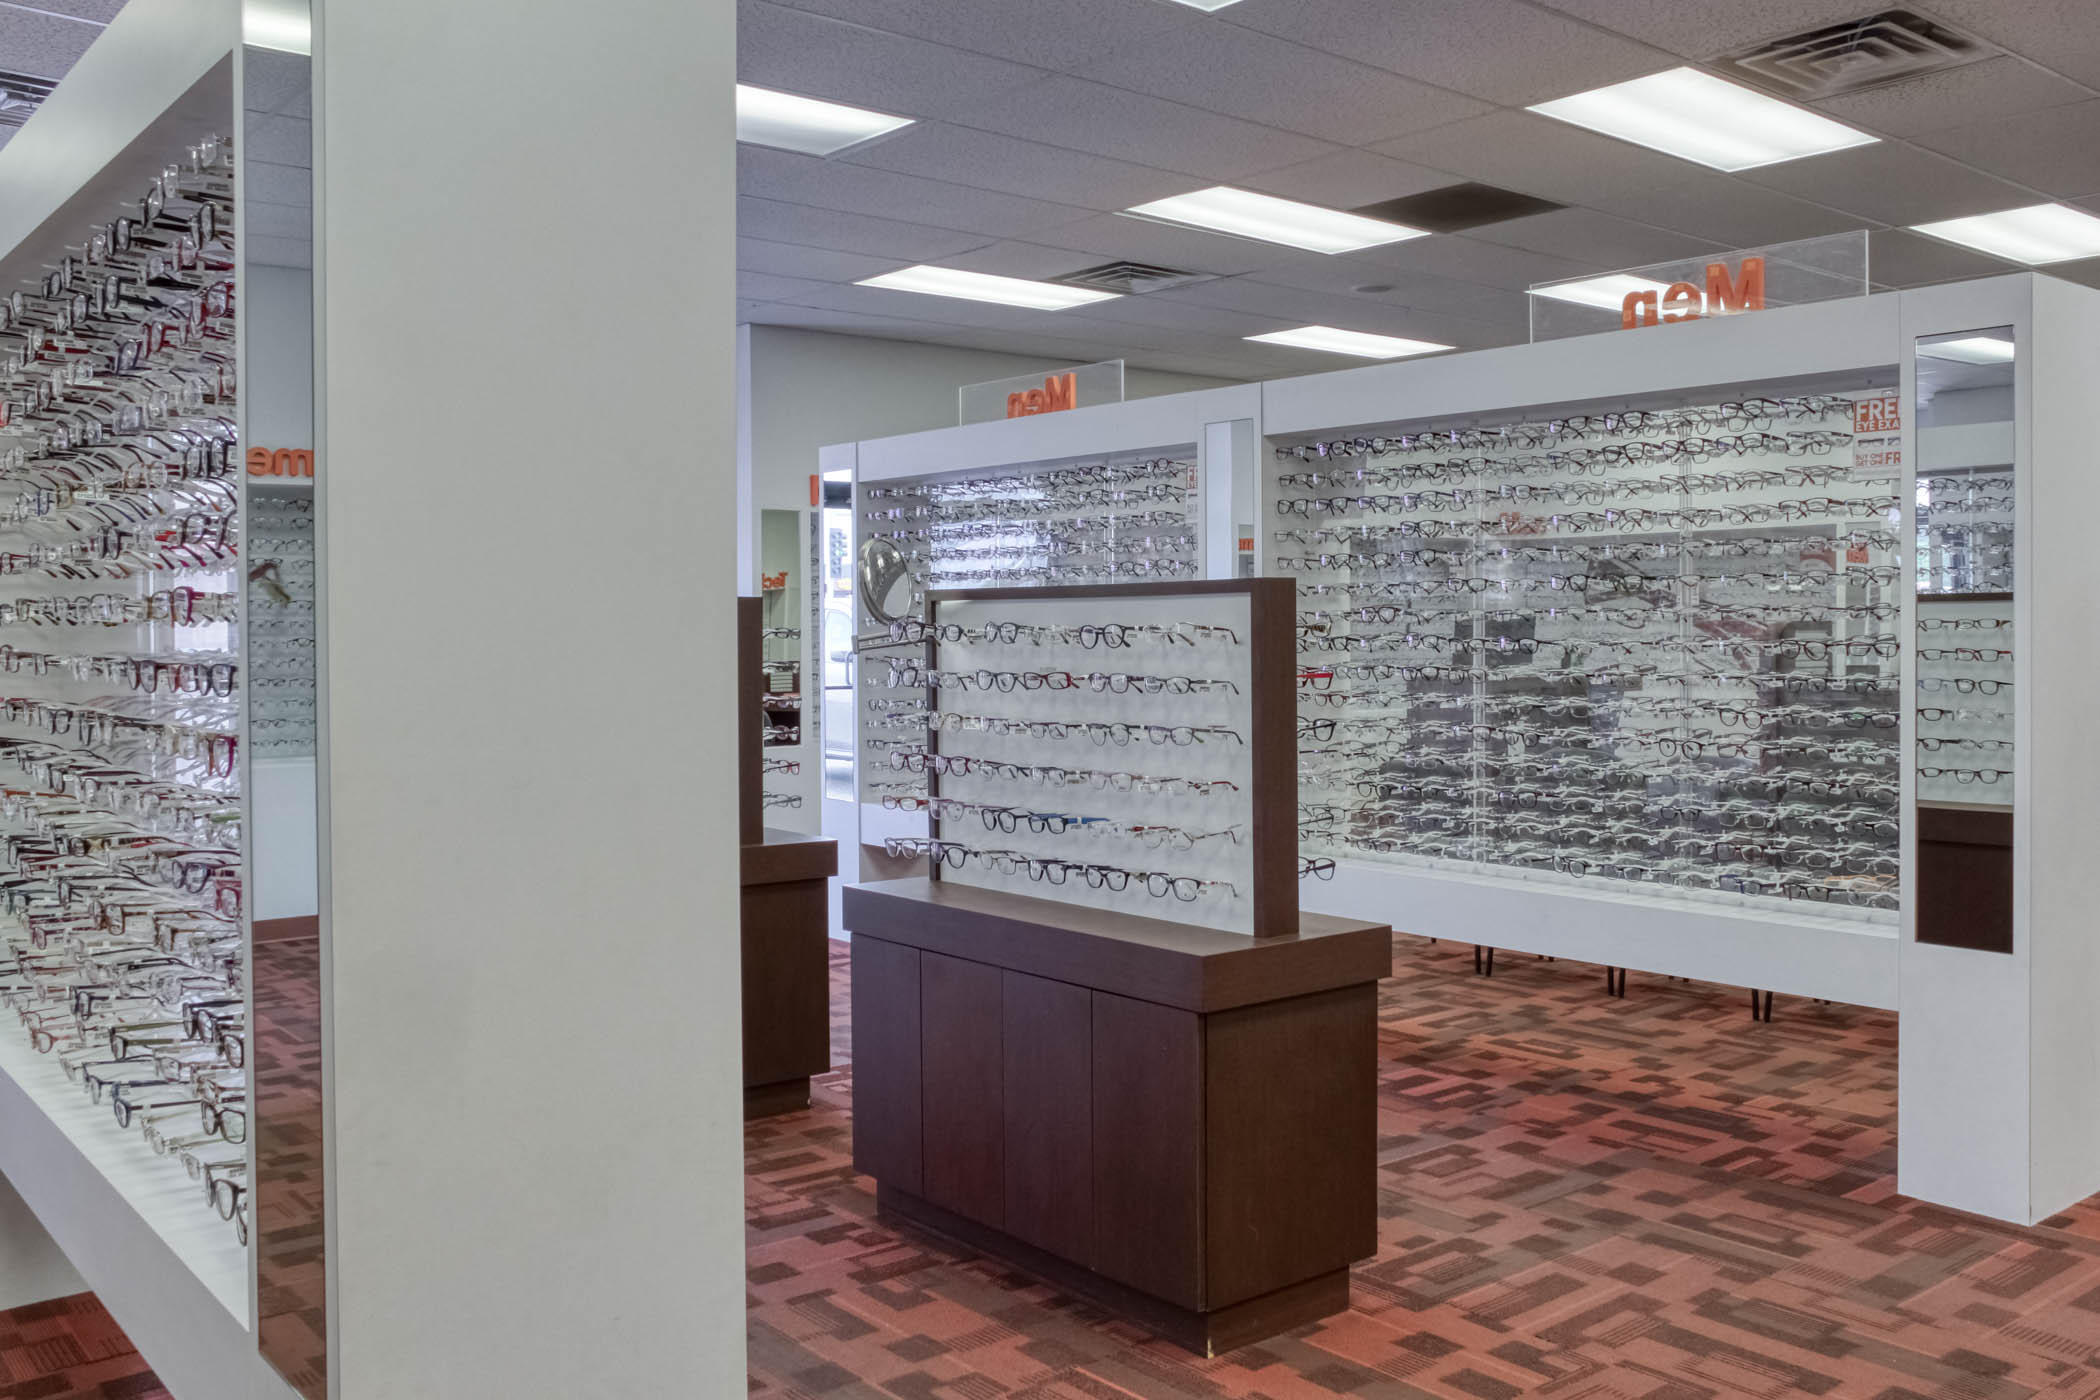 Eyeglasses for sale at Stanton Optical store in Lubbock, TX 79414 Stanton Optical Lubbock (806)305-9420